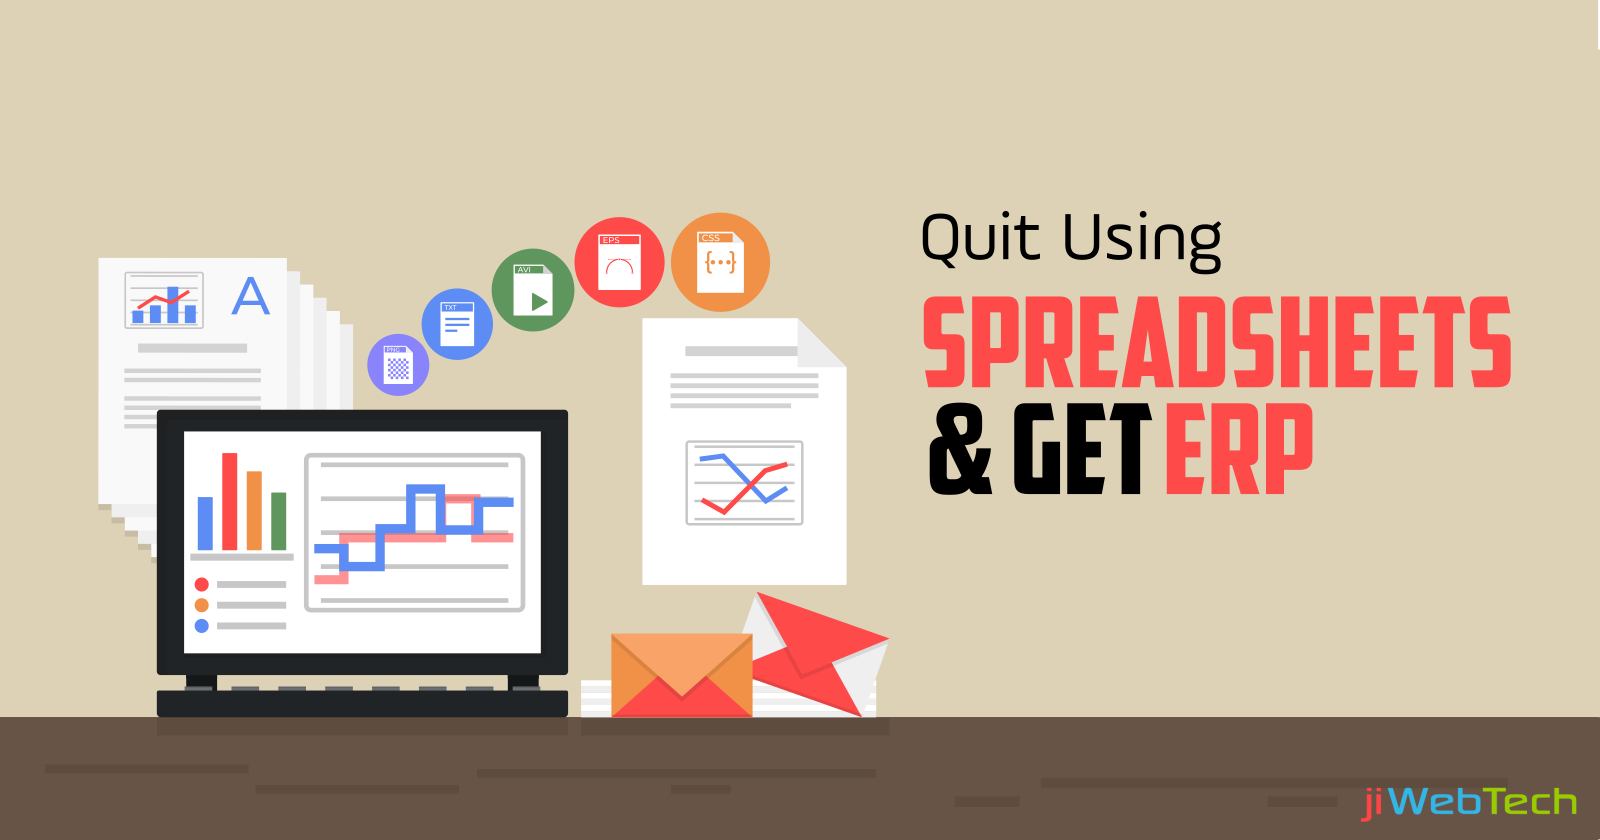 Signs to Quit Using Spreadsheets and Get an ERP!